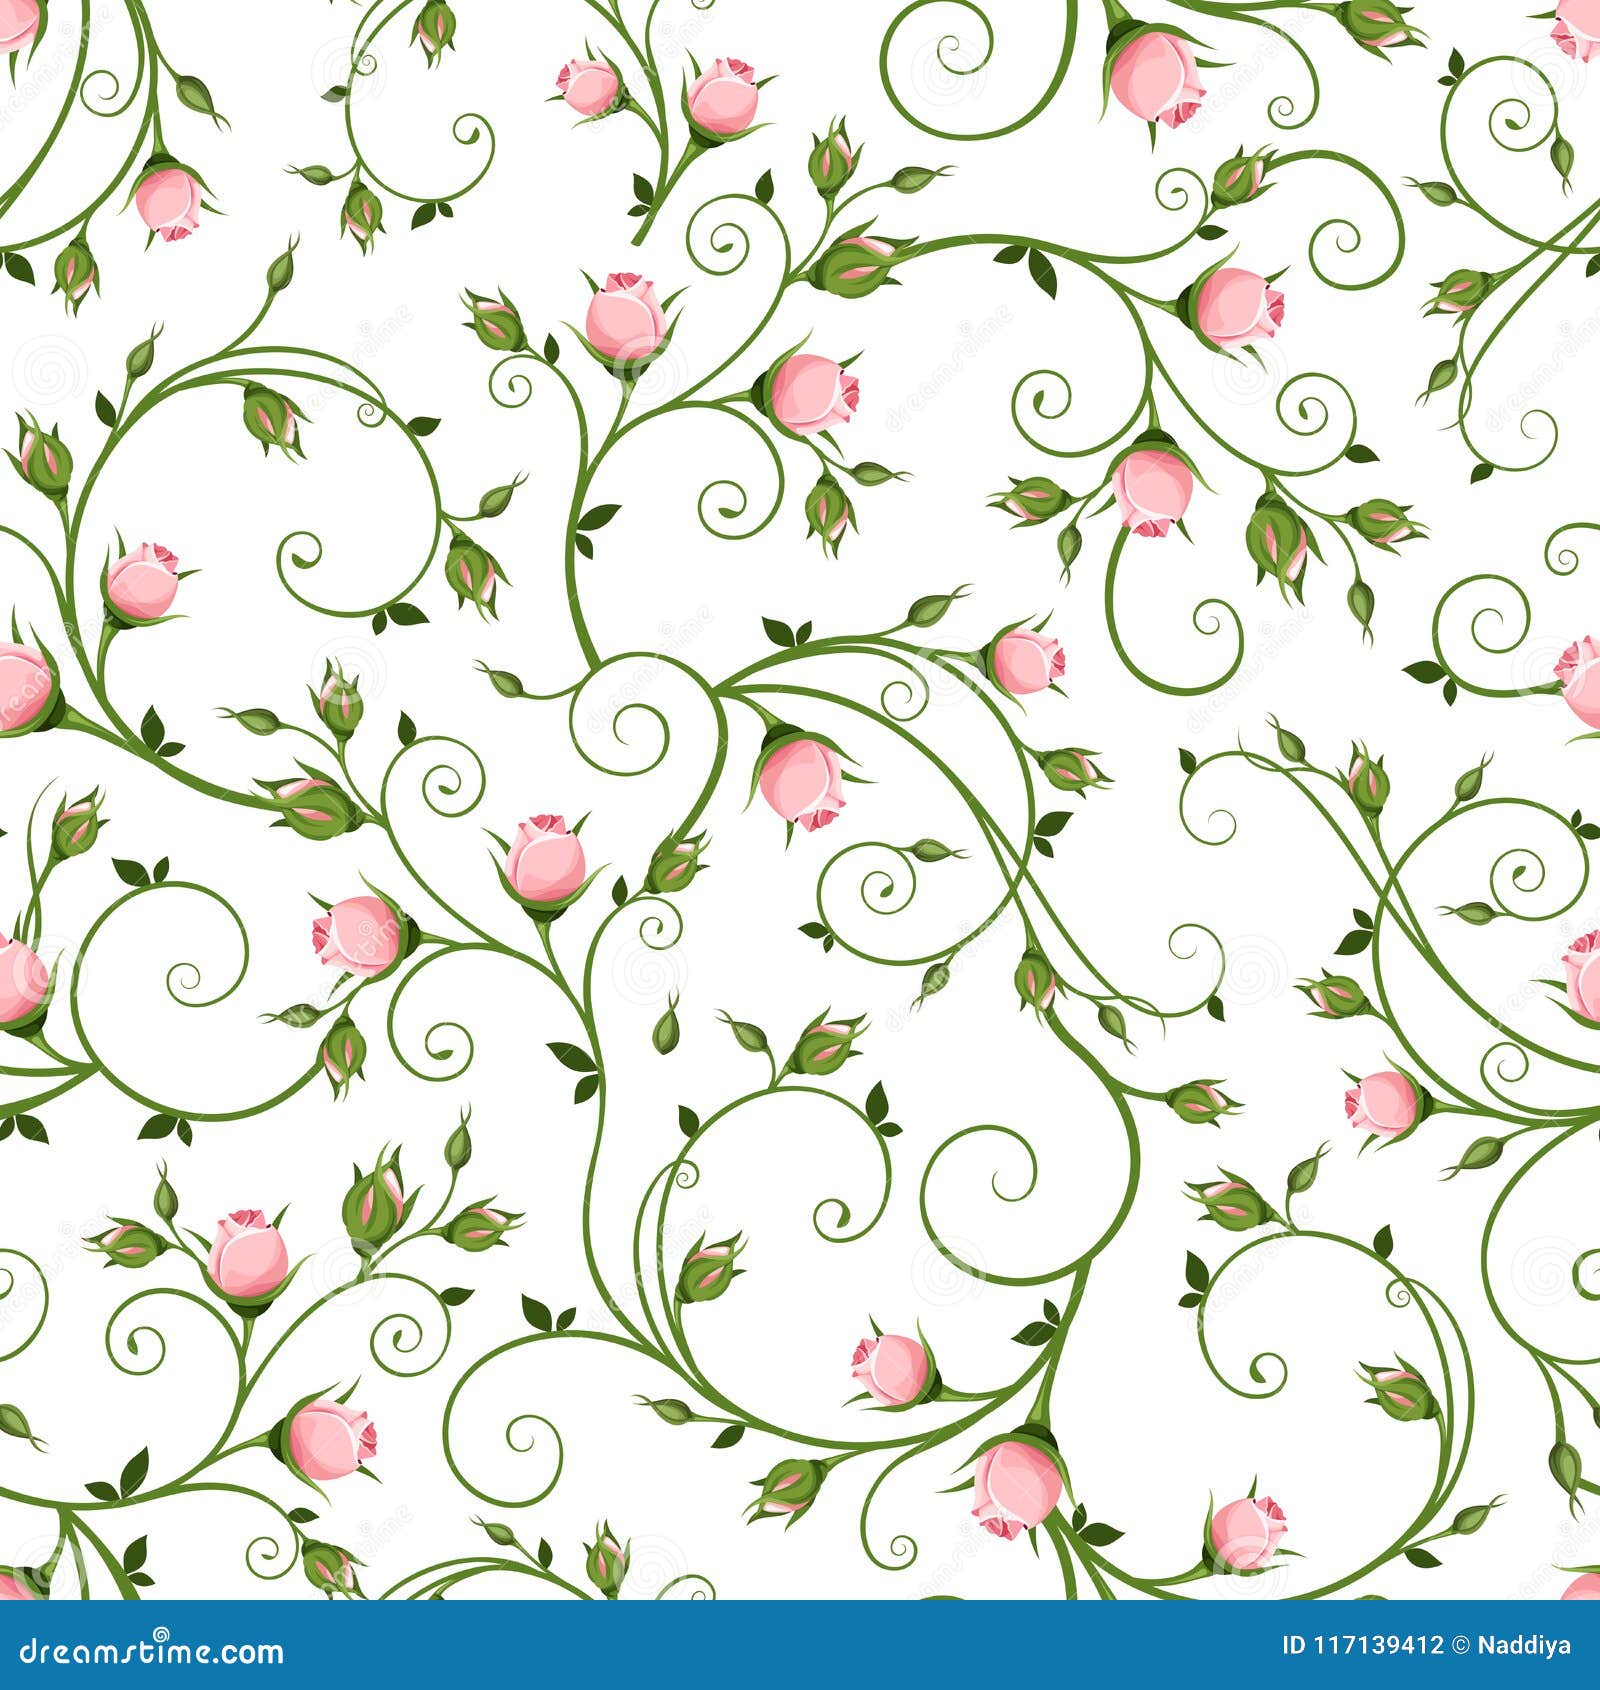 seamless floral pattern with pink rosebuds.  .